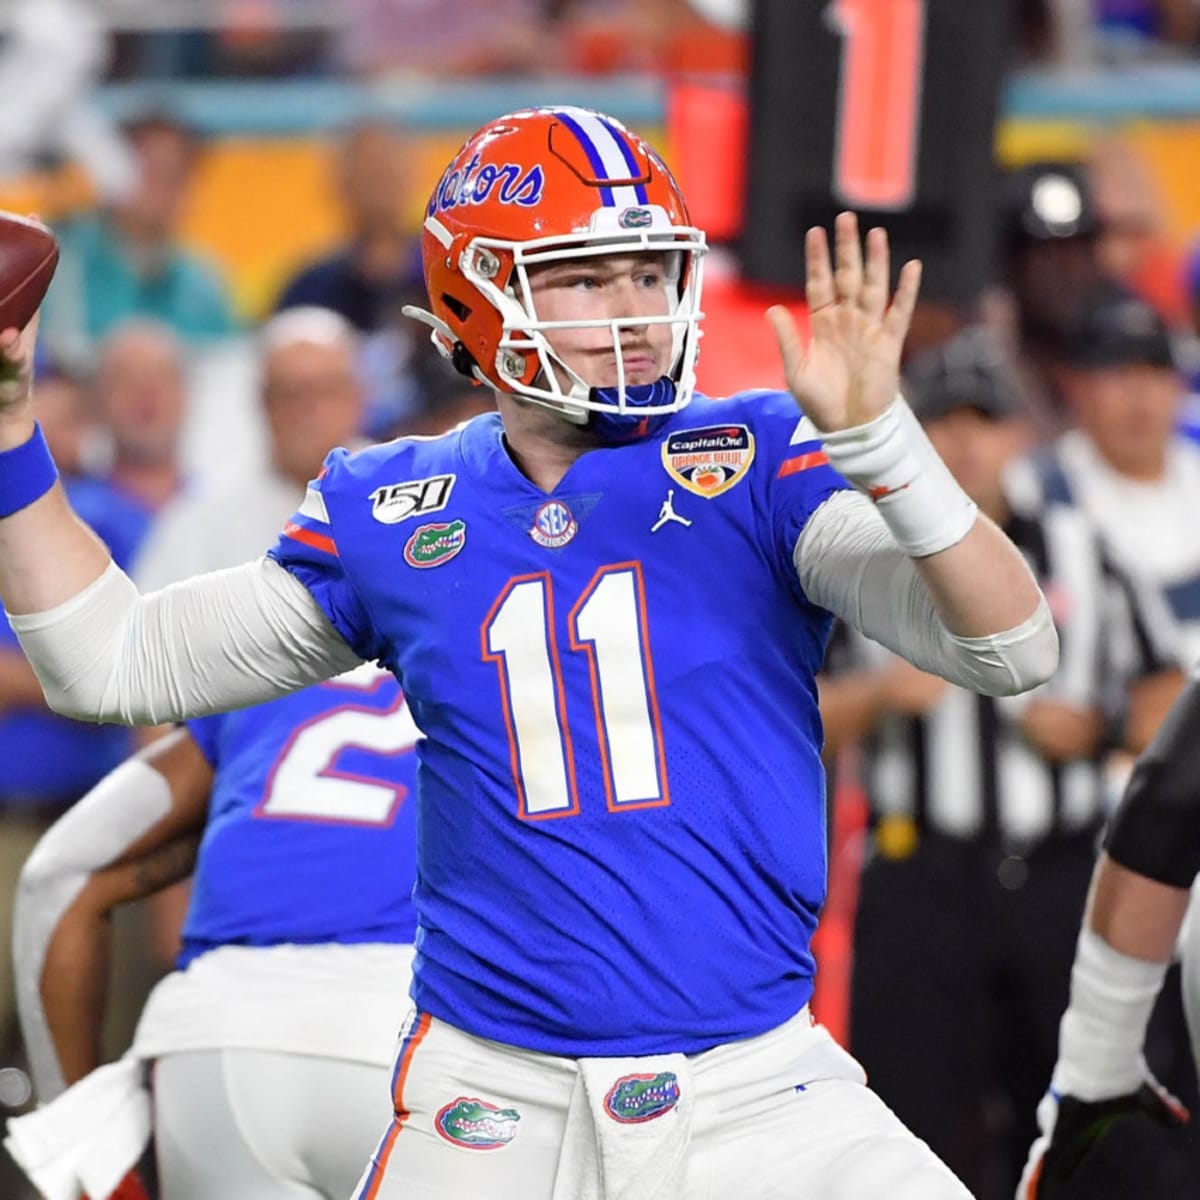 What Are the Expectations for Gators QB Kyle Trask Heading Into